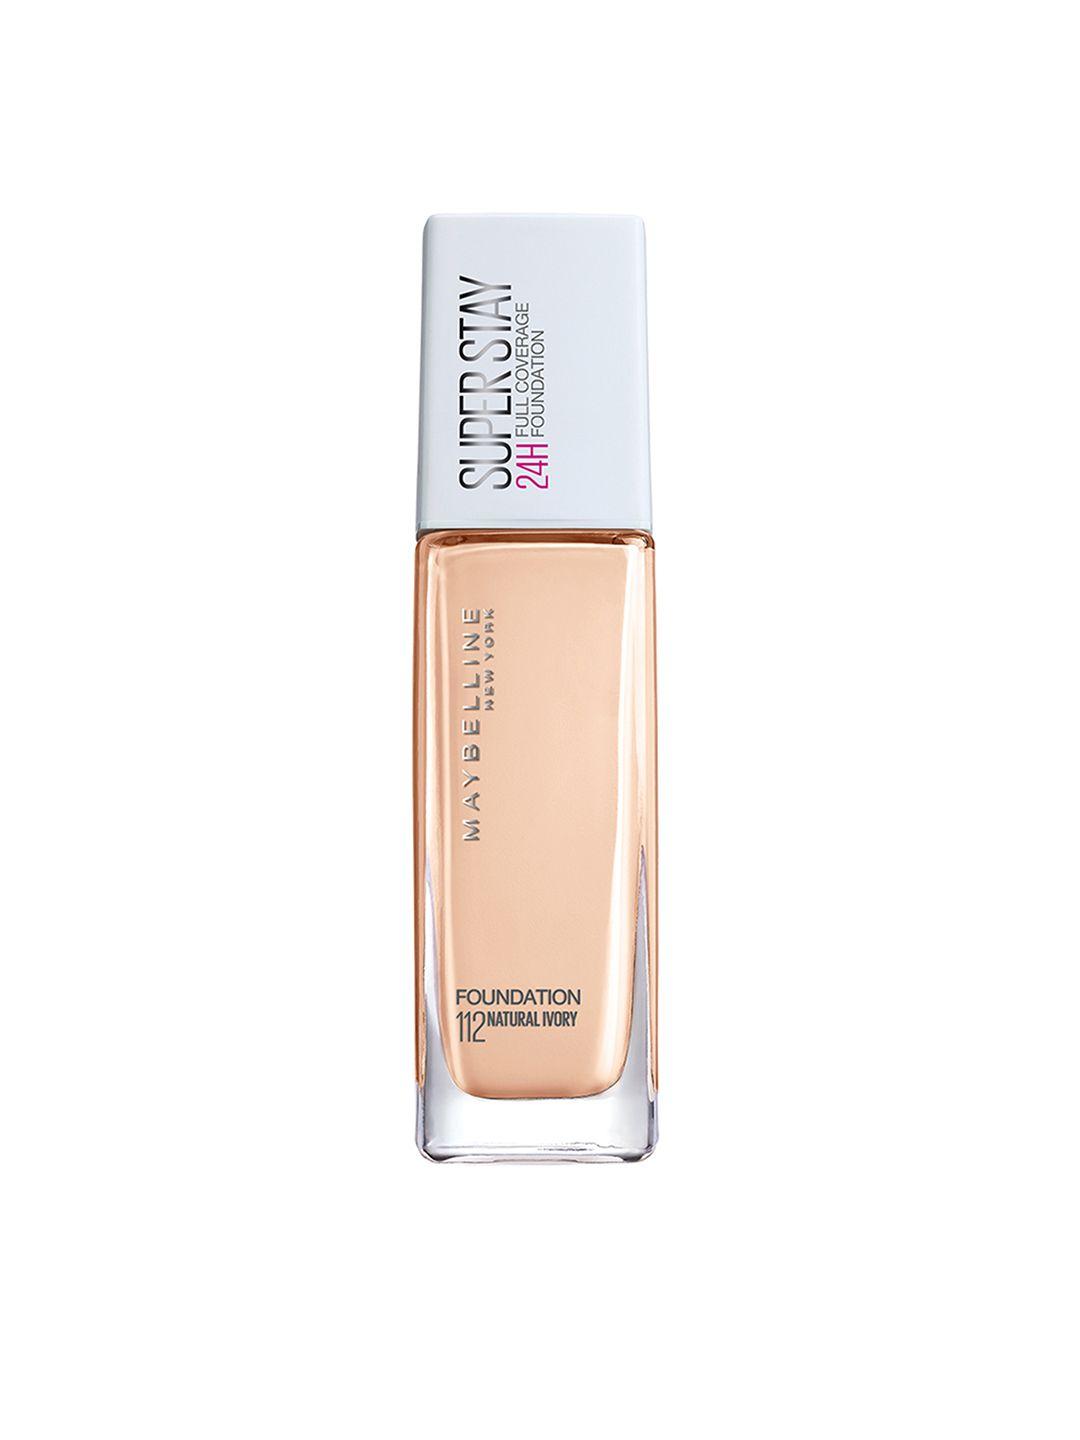 maybelline new york super stay 24h full coverage foundation - natural ivory 112